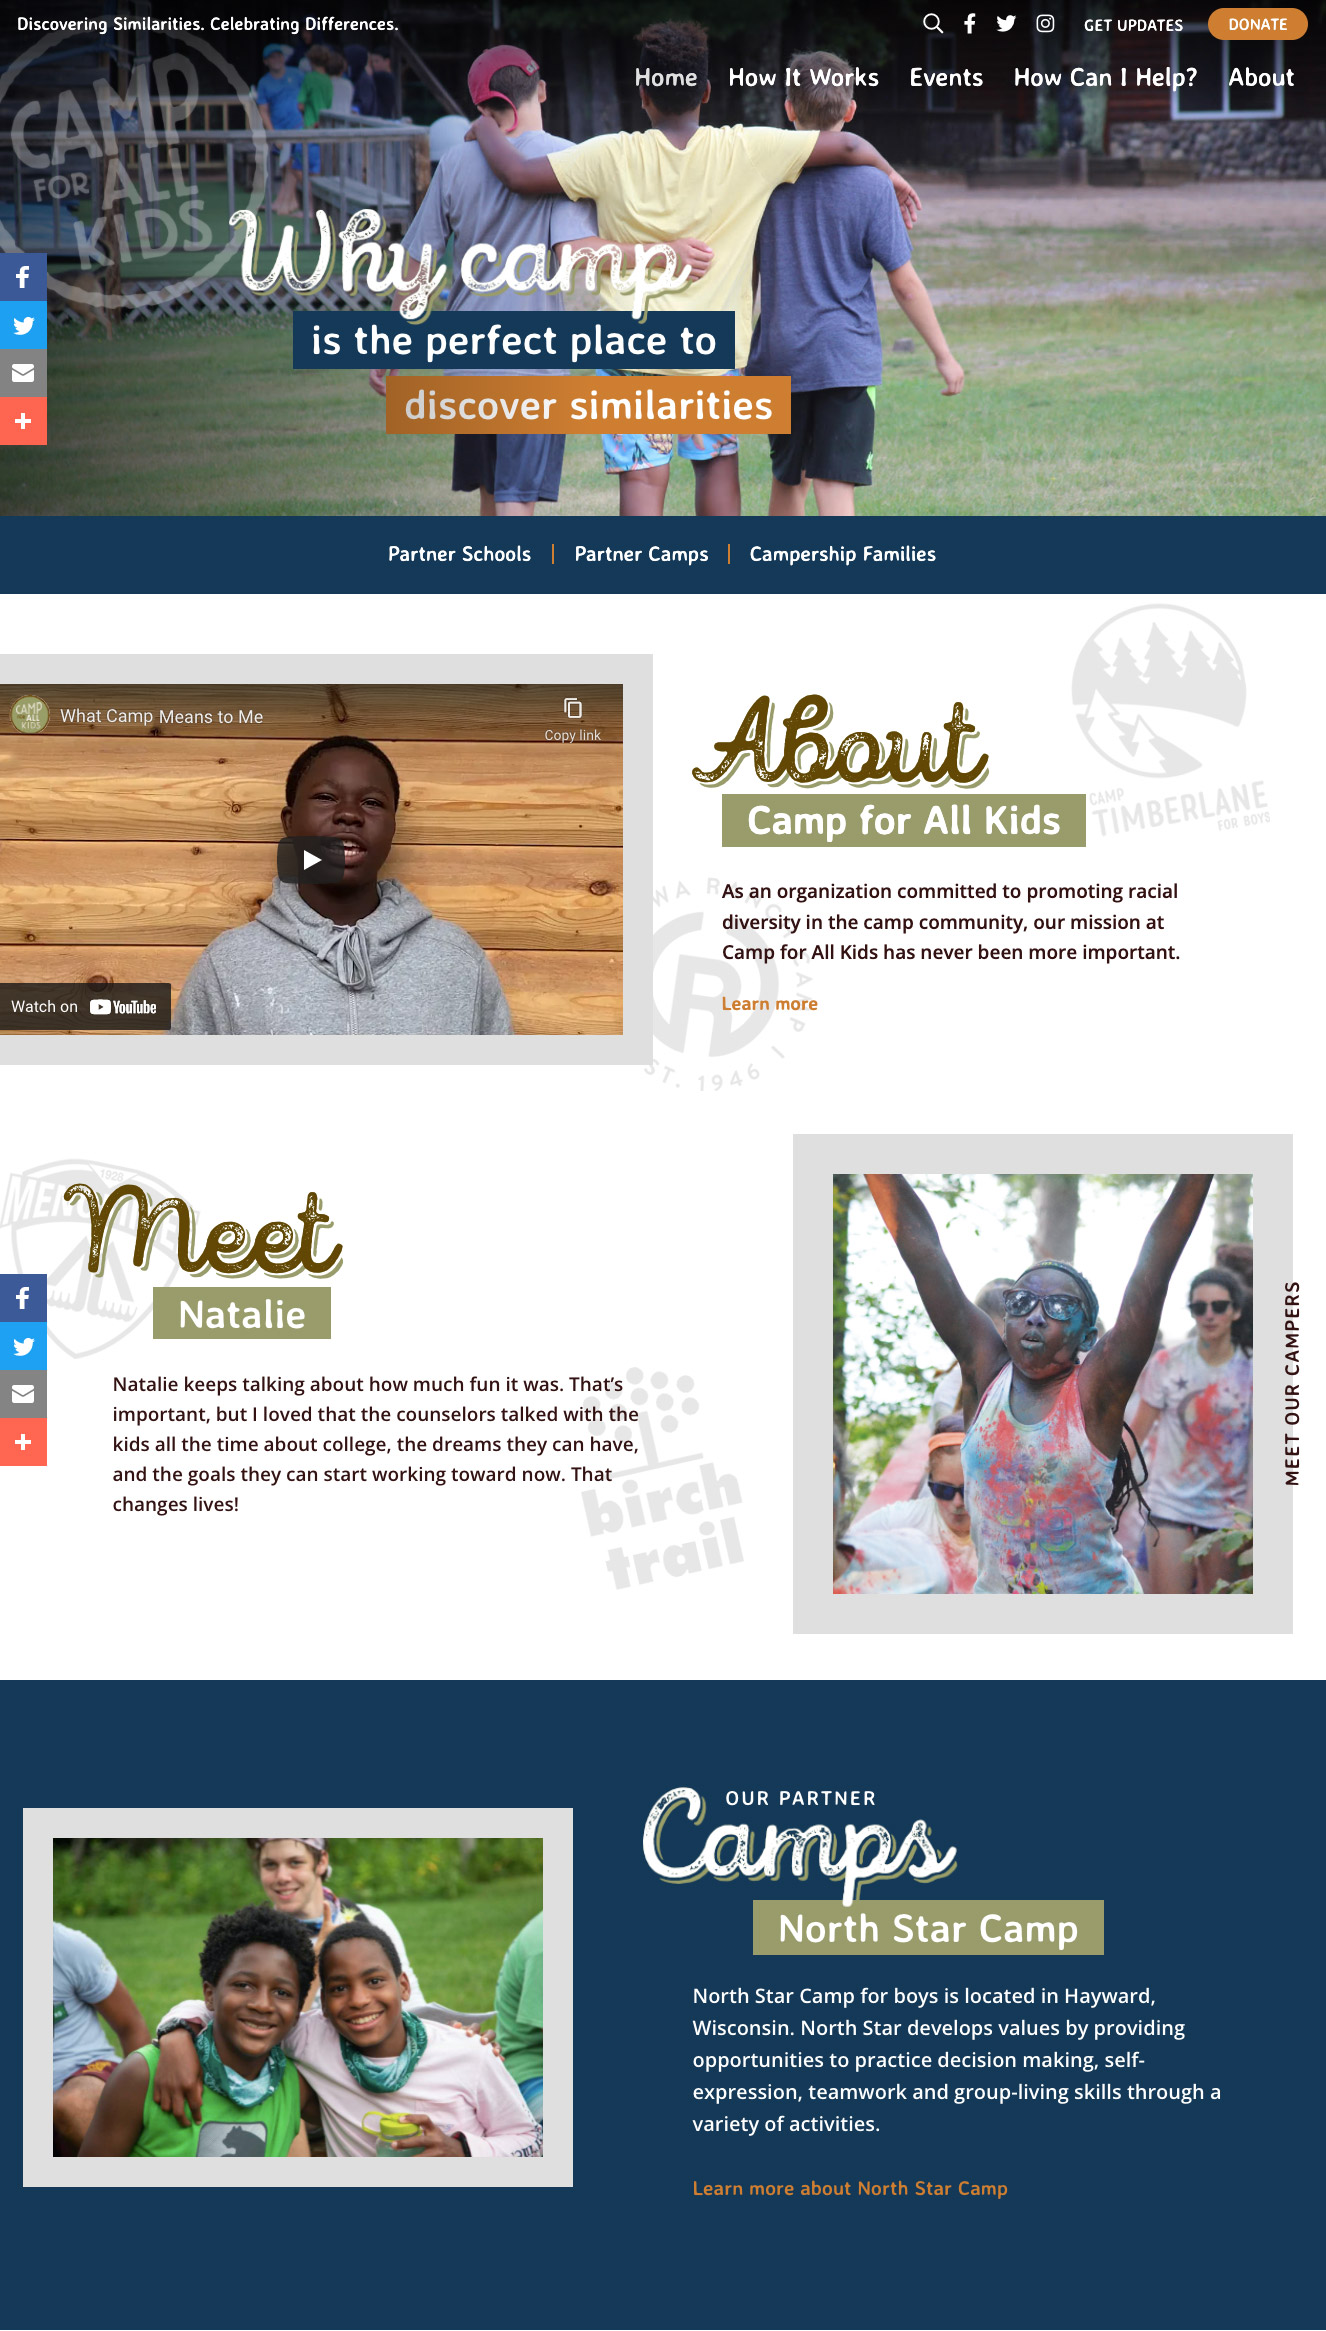 Camp for All Kids website home page